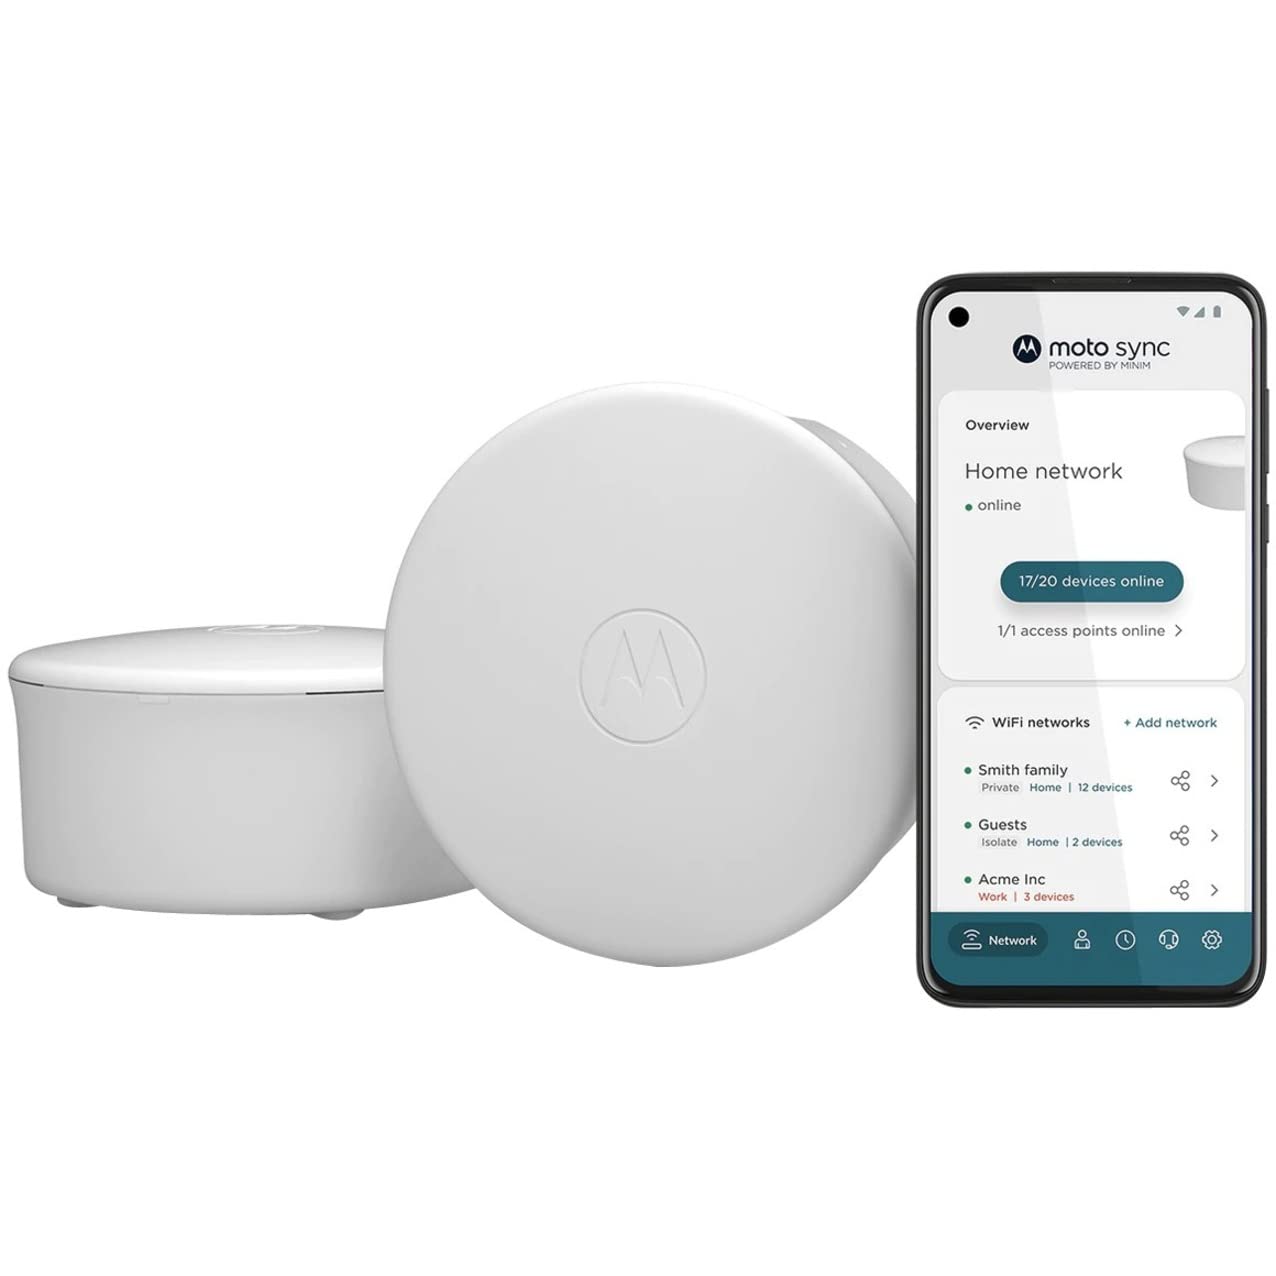 Motorola MH7602 | WiFi 6 Router + Intelligent Mesh System | 2 Units | Easy Setup, Security, Adblocking & Parental Controls with The Secure Motosync app | AX1800 WiFi